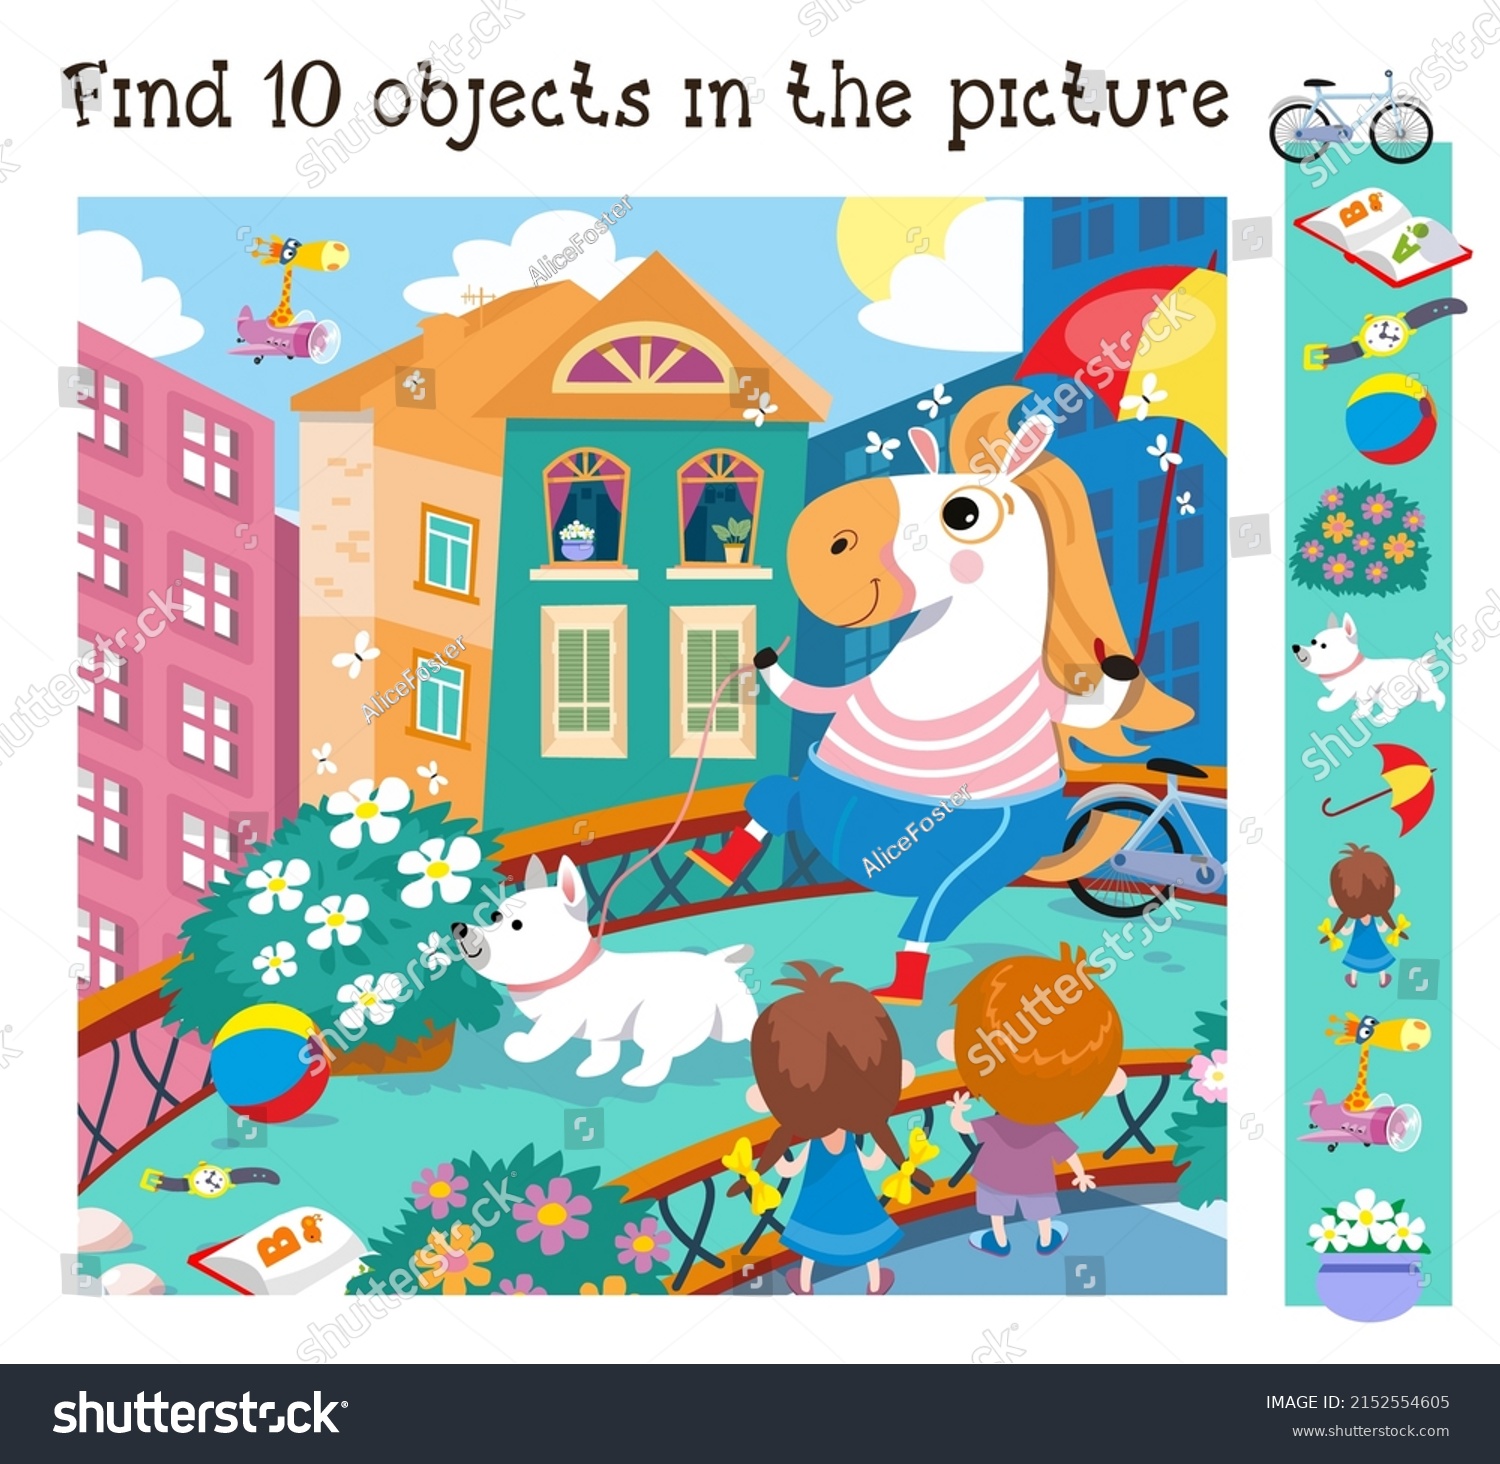 find-10-hidden-objects-educational-game-stock-vector-royalty-free